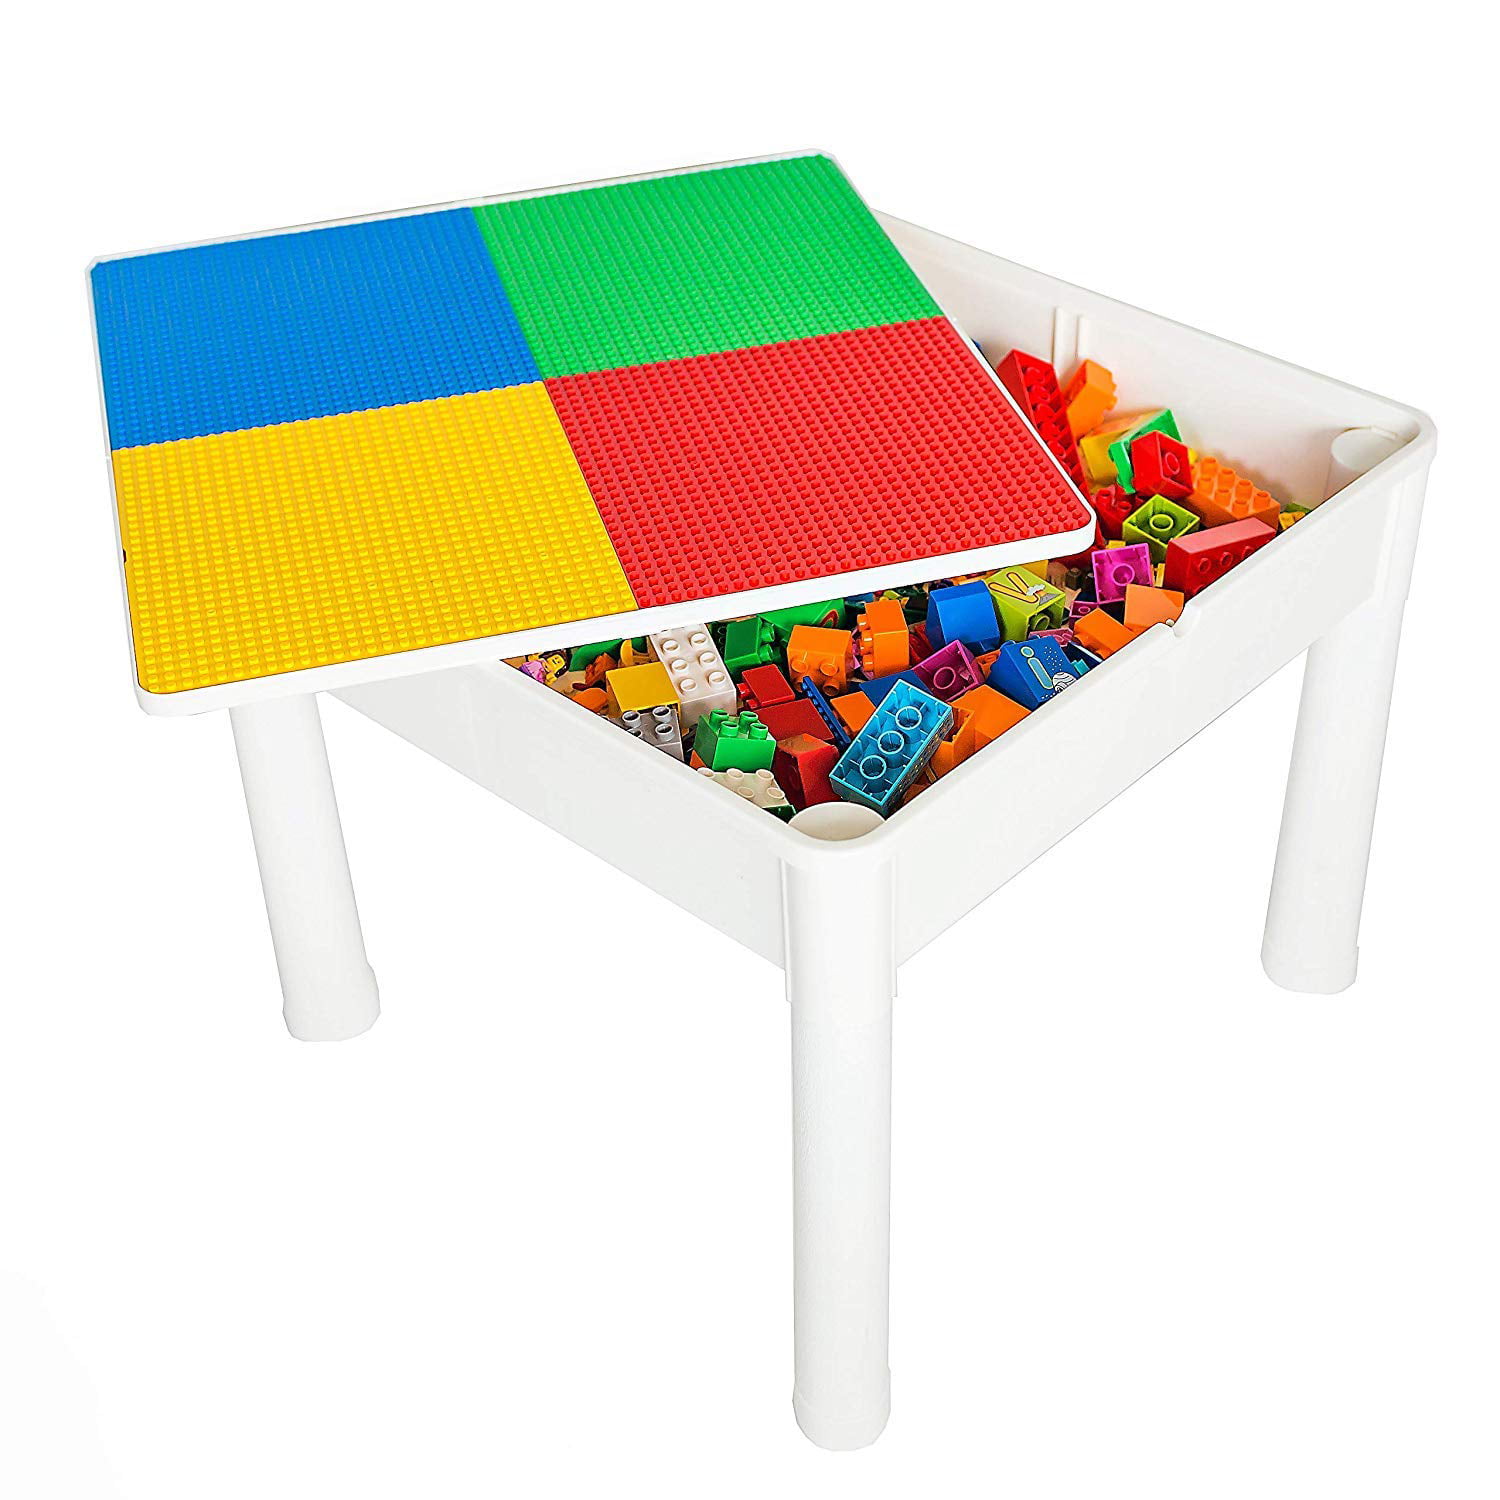 Lego Table Best Item 4 In 1 Play Build Table Set For Indoor Activity